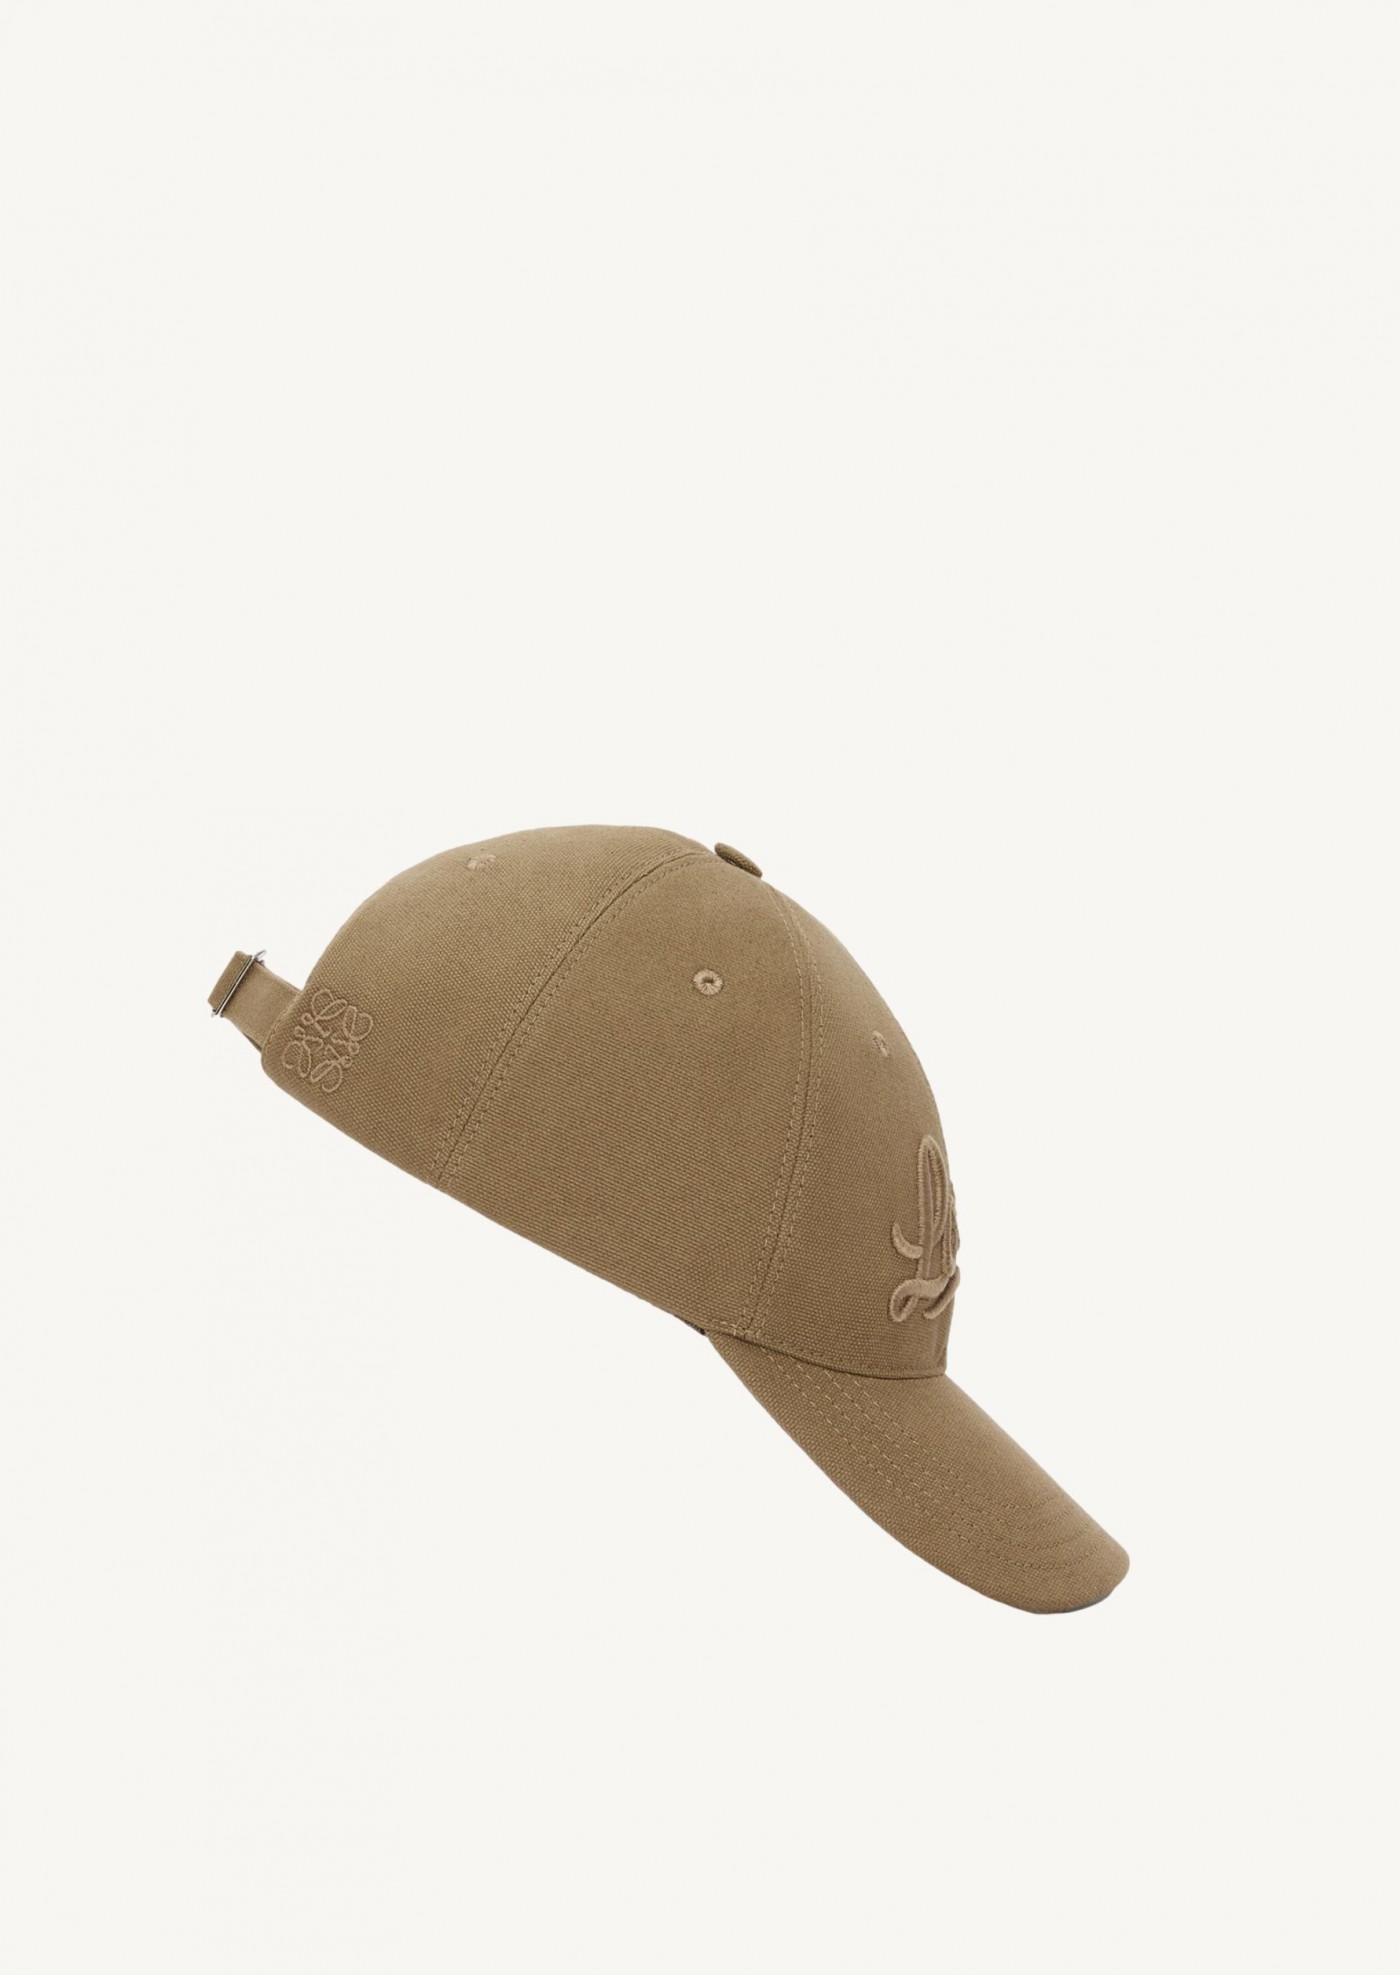 Cap in canvas olive